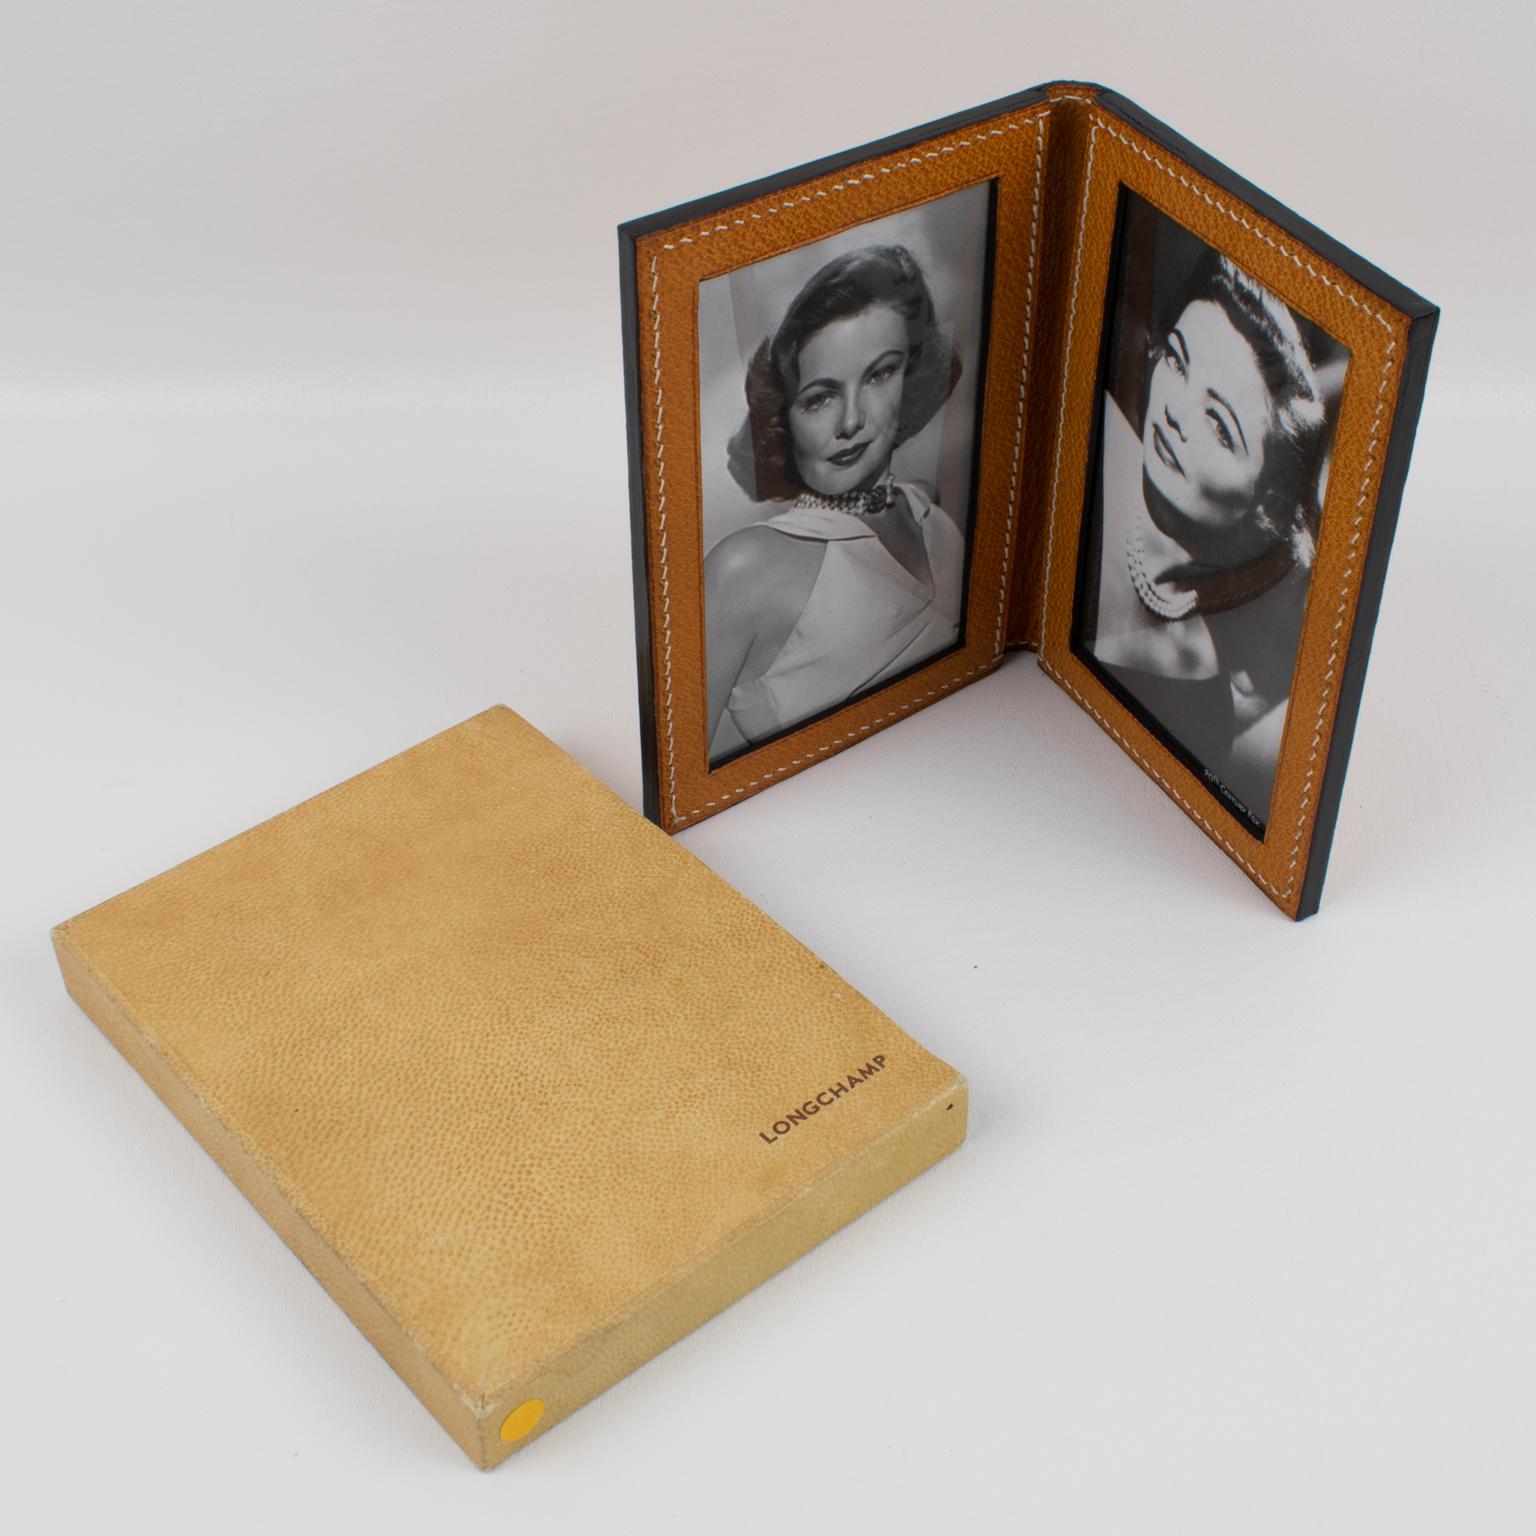 Sophisticated 1940s modernist leather picture photo frame by Longchamp, Paris. Natural light cognac leather with pattern and hand-stitched finish. This is a double-view folding frame that can also be used in travel. In pristine condition, still with